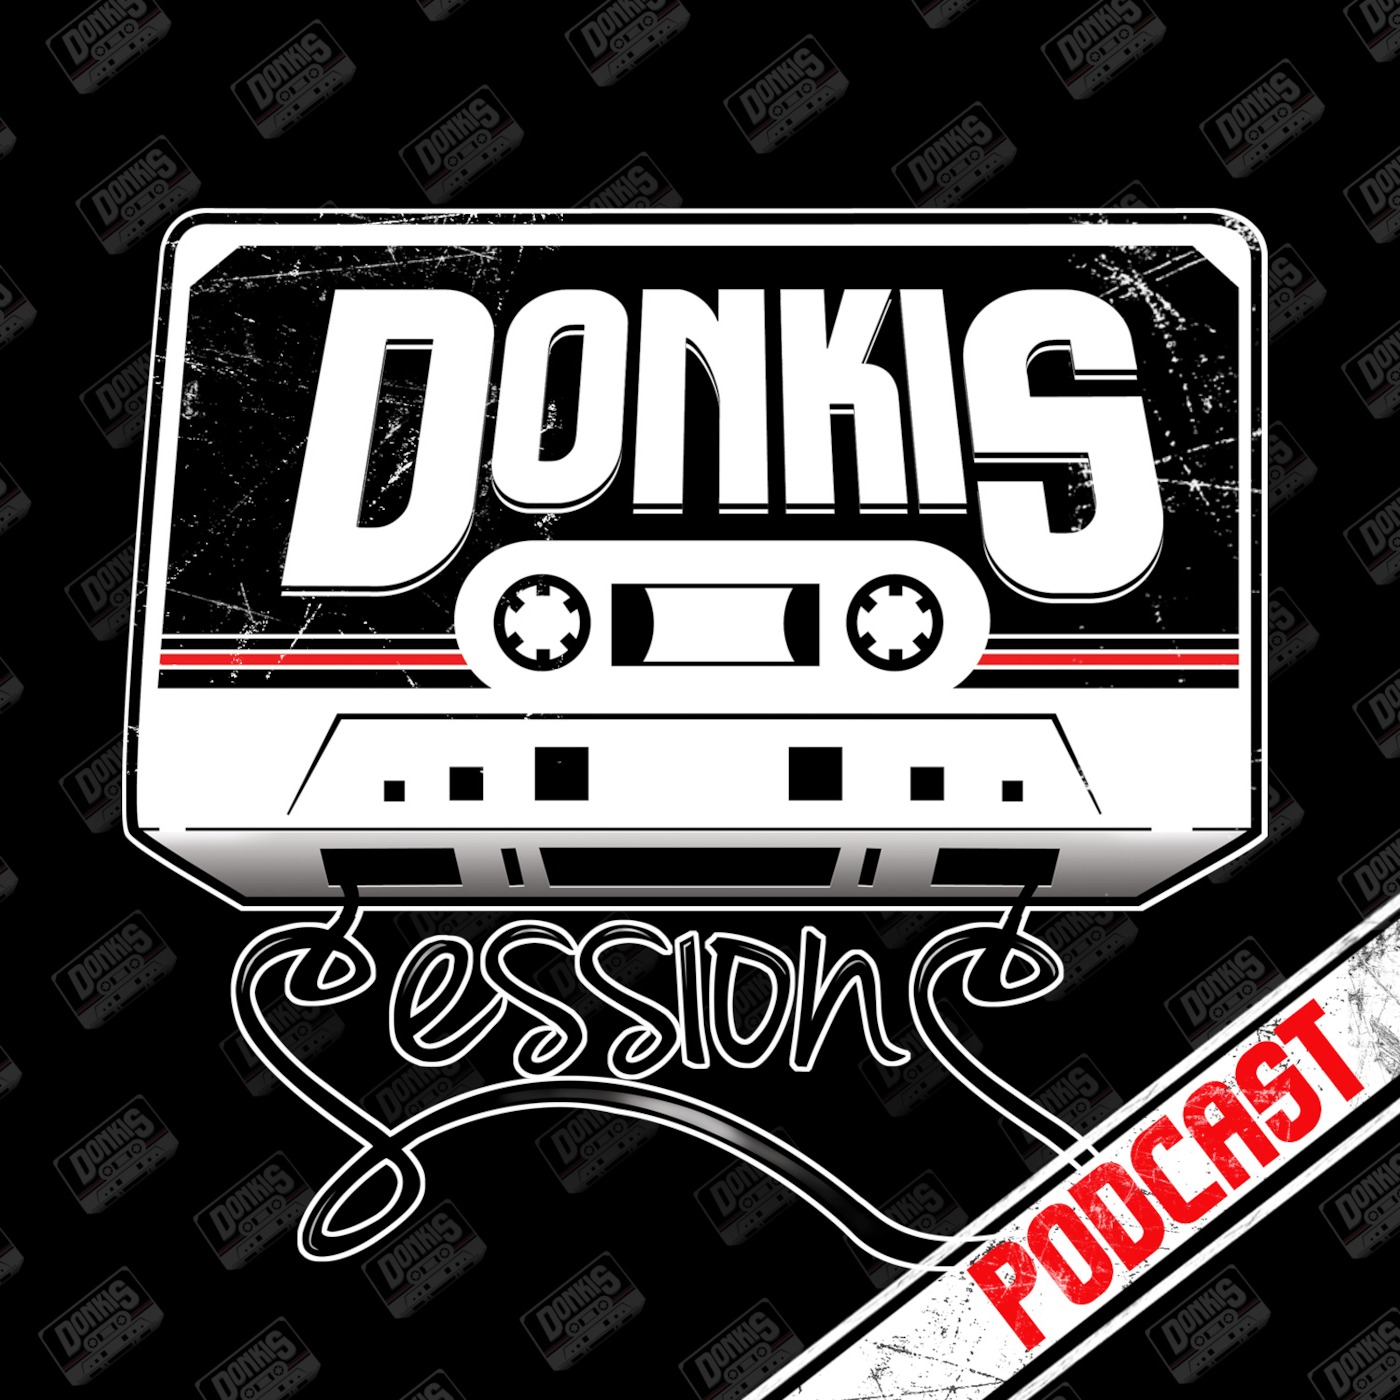 Sessions Podcast ft Donkis Episode 4